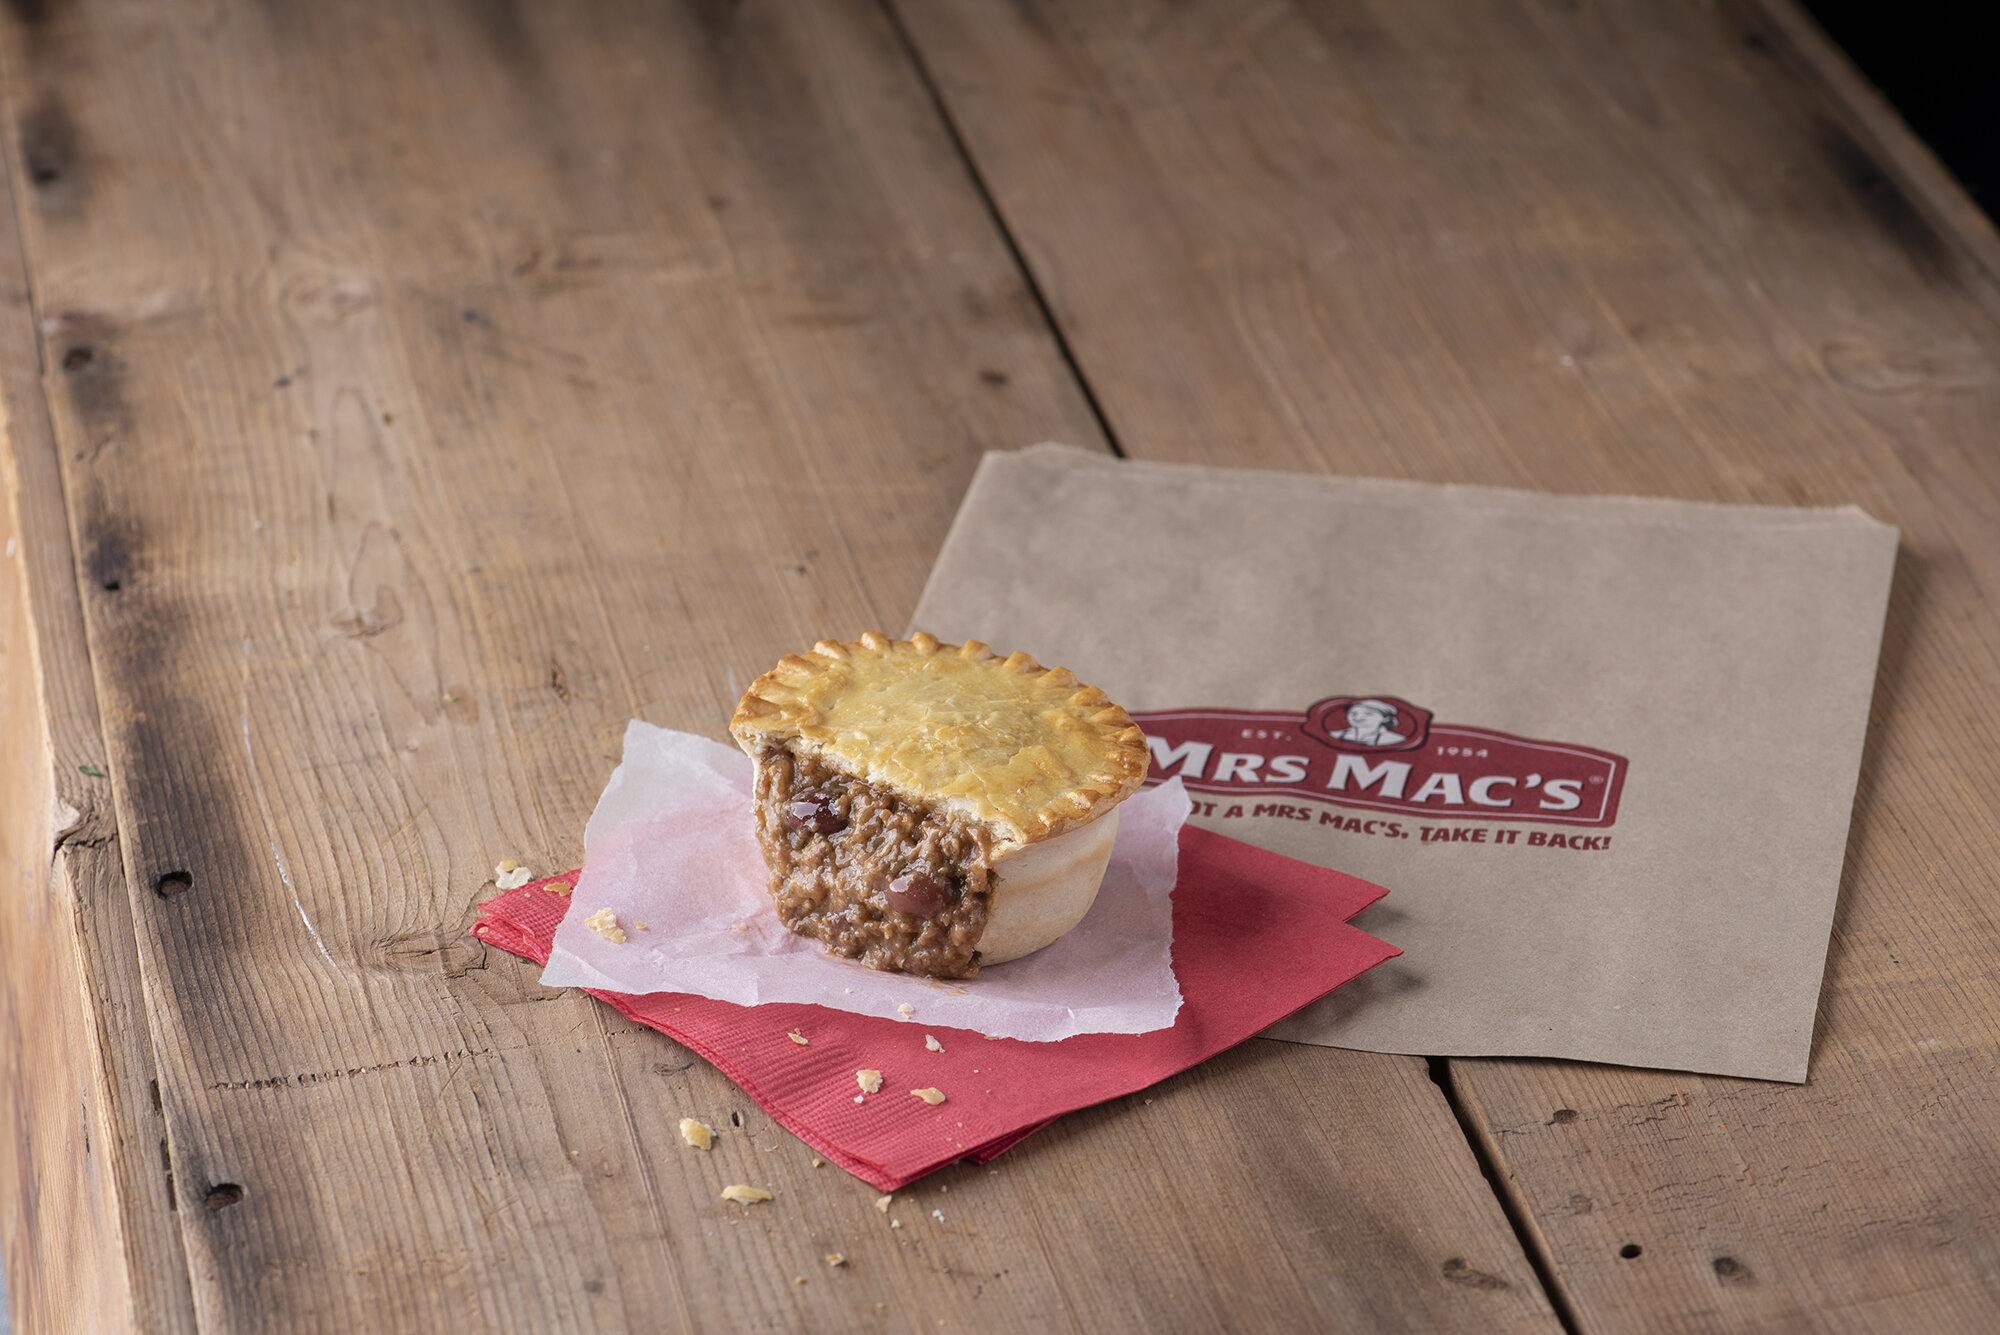 Client: Mrs Mac's | Agency: King Street, The Brand Agency | Photography:  Harriet Harcourt